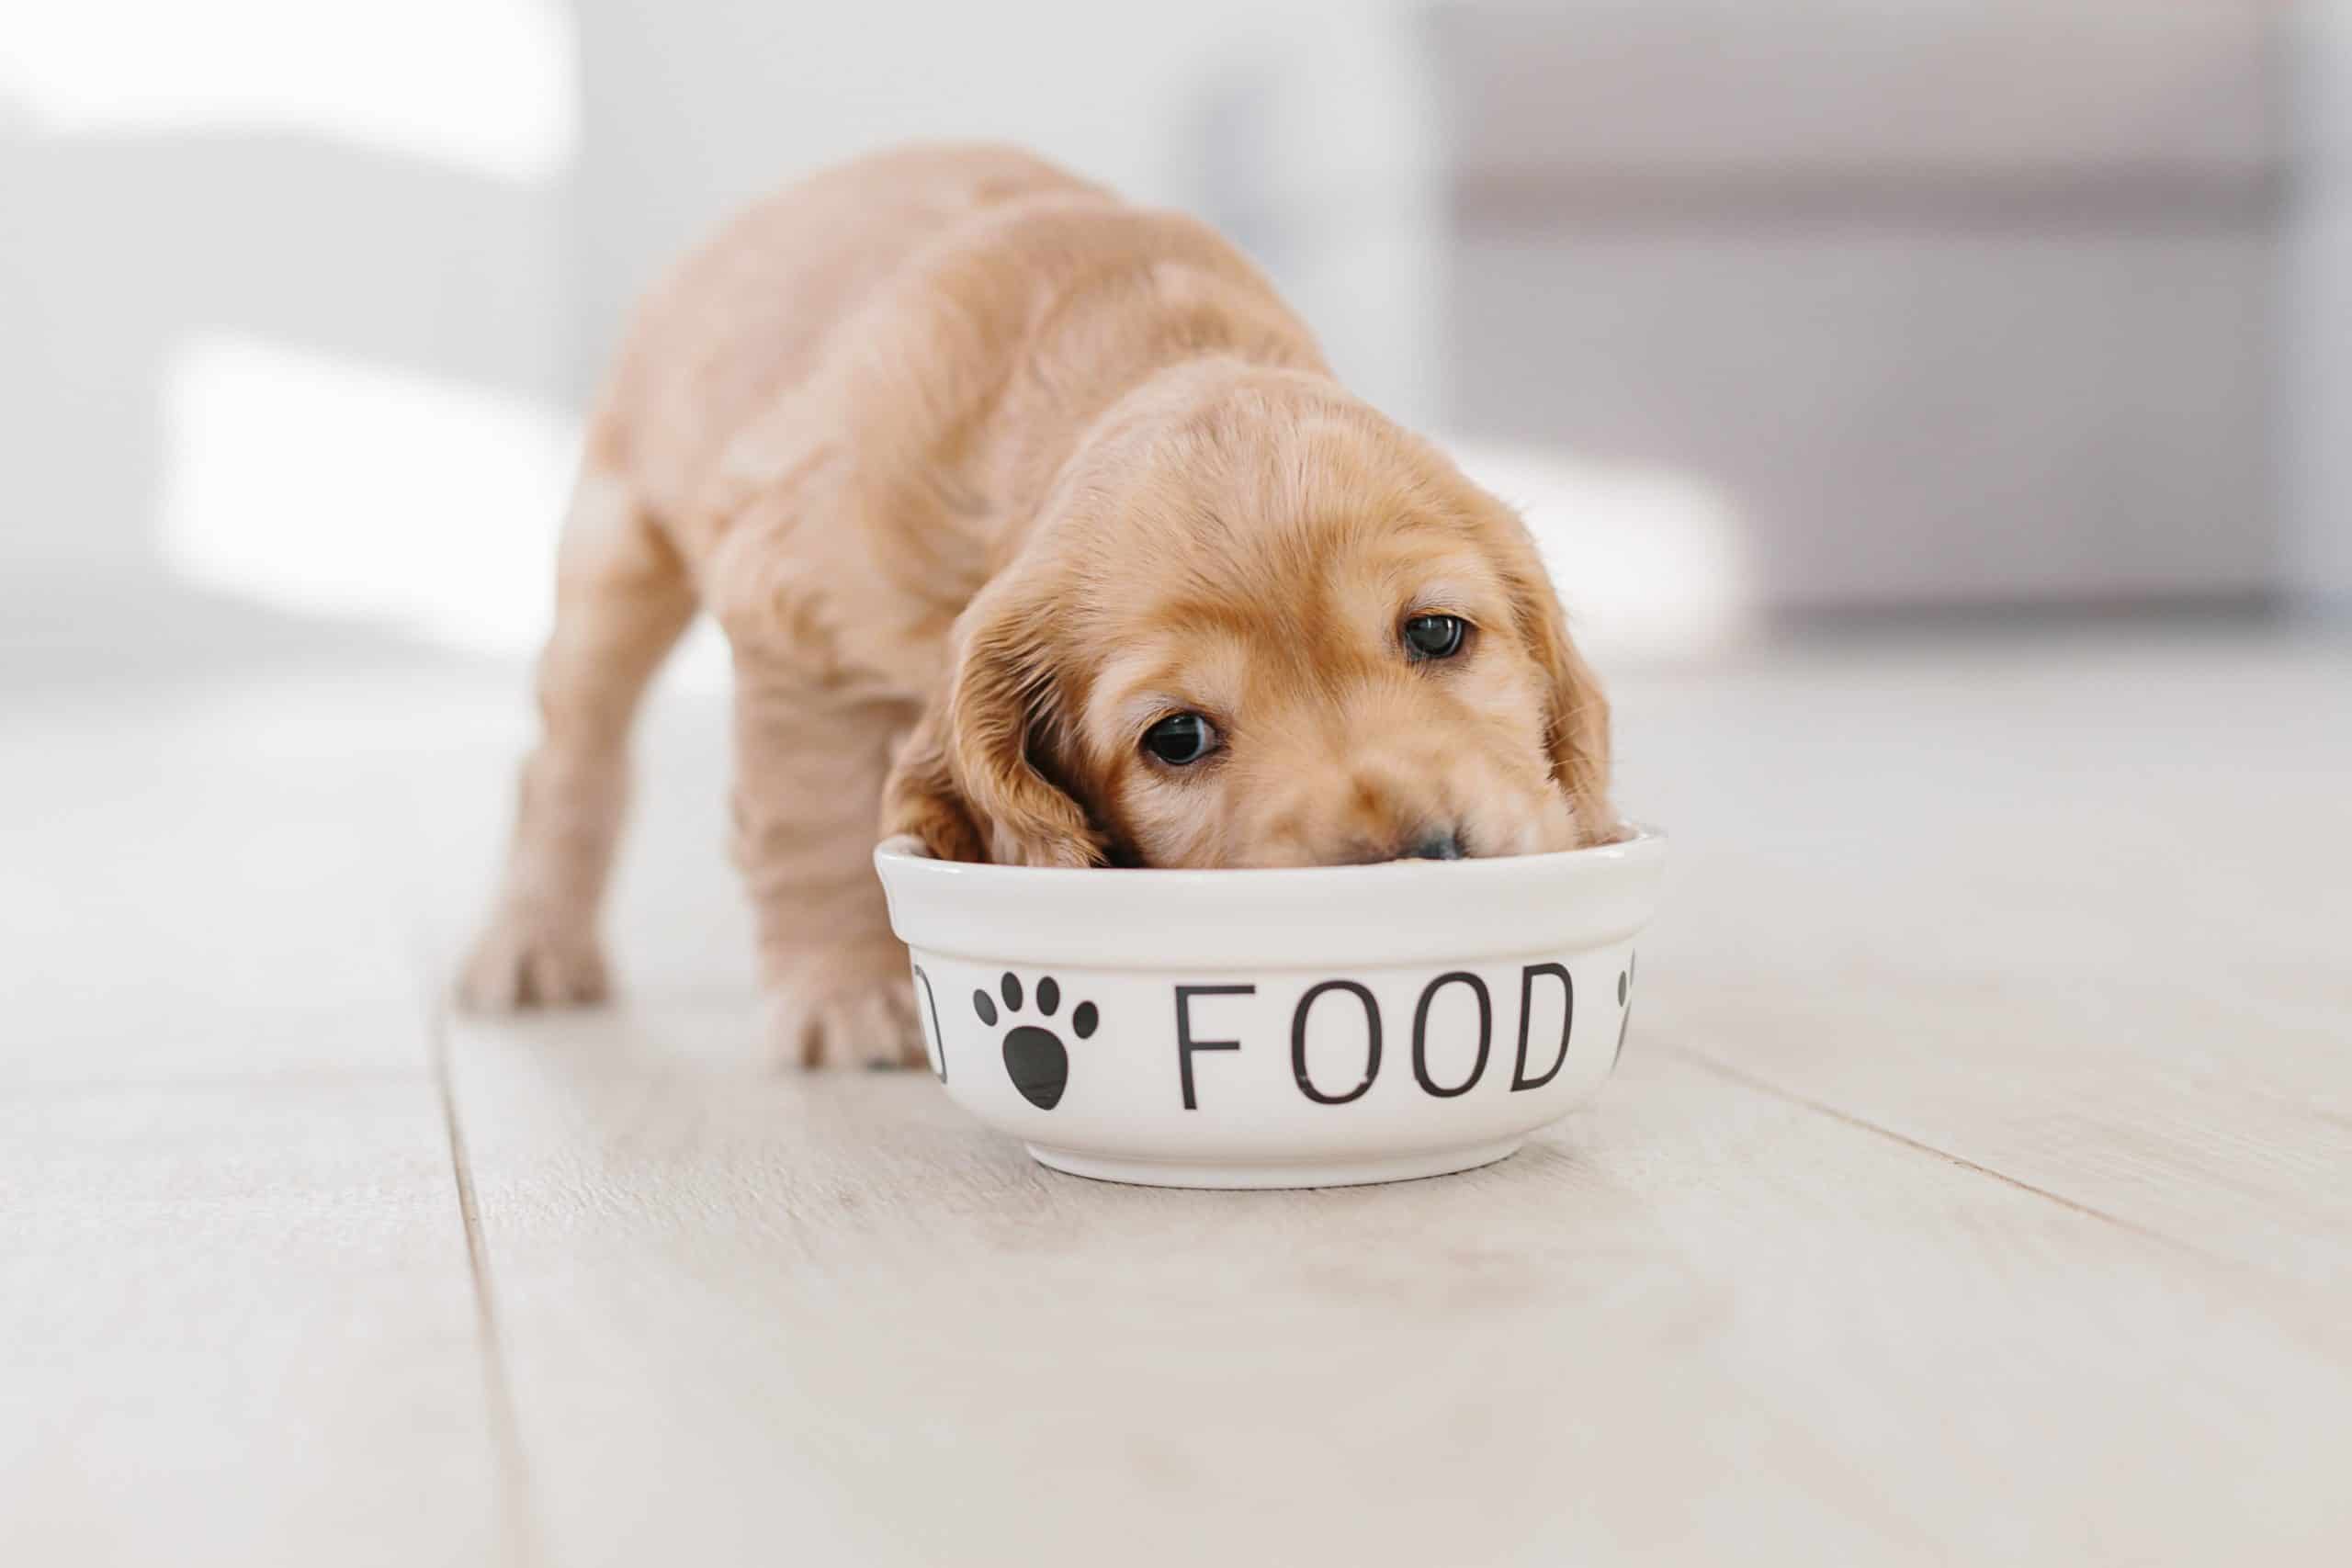 English cocker spaniel eats dog food from bowl. Many dog food companies are producing insect-based dog food and treat using a sustainable protein derived from crickets and other insects.